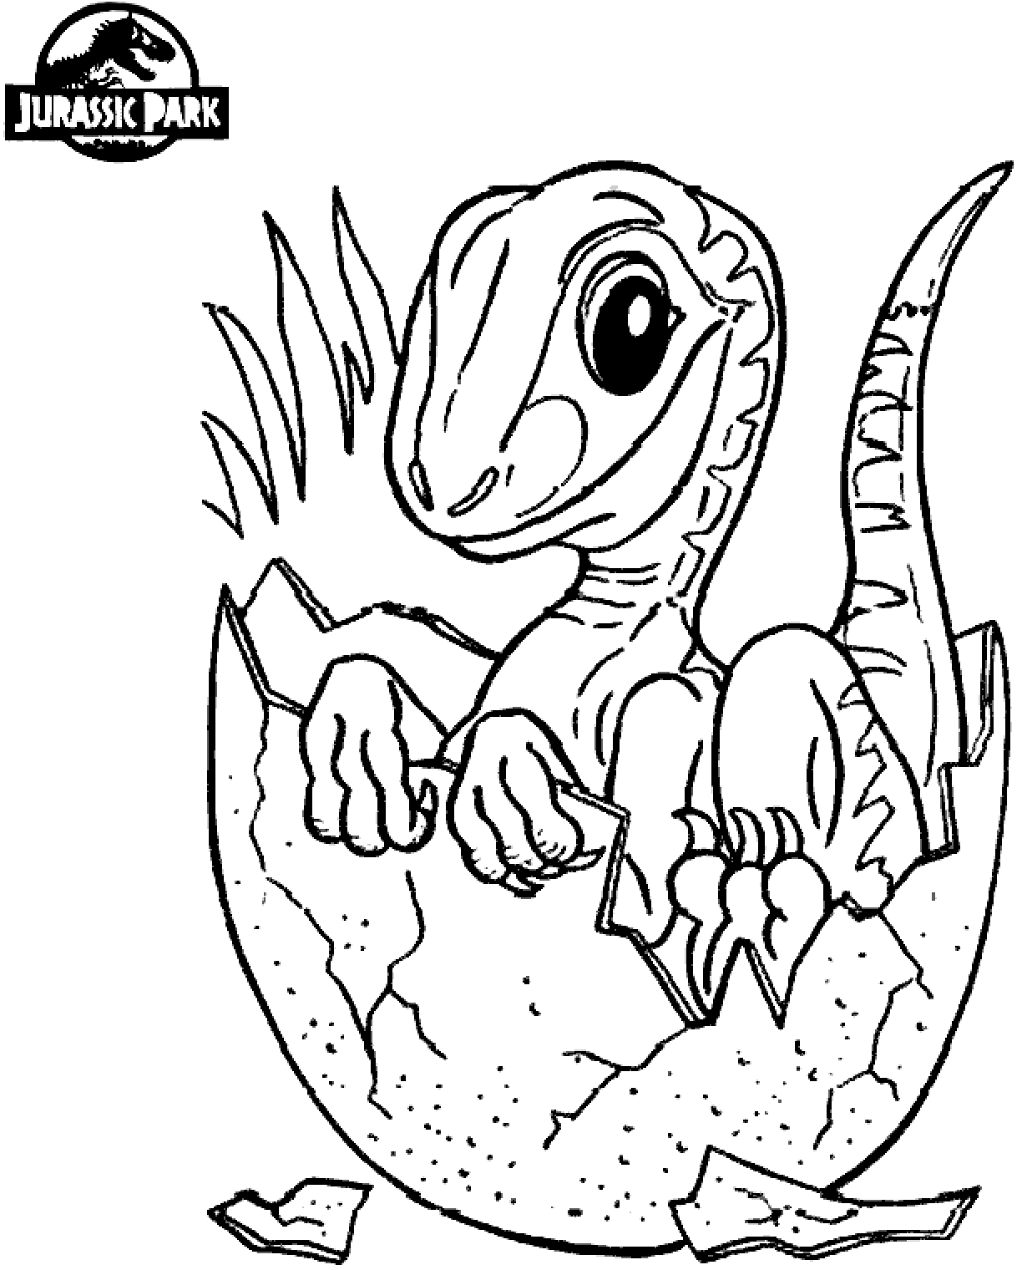 Baby Dinosaur In Jurassic World Coloring Page